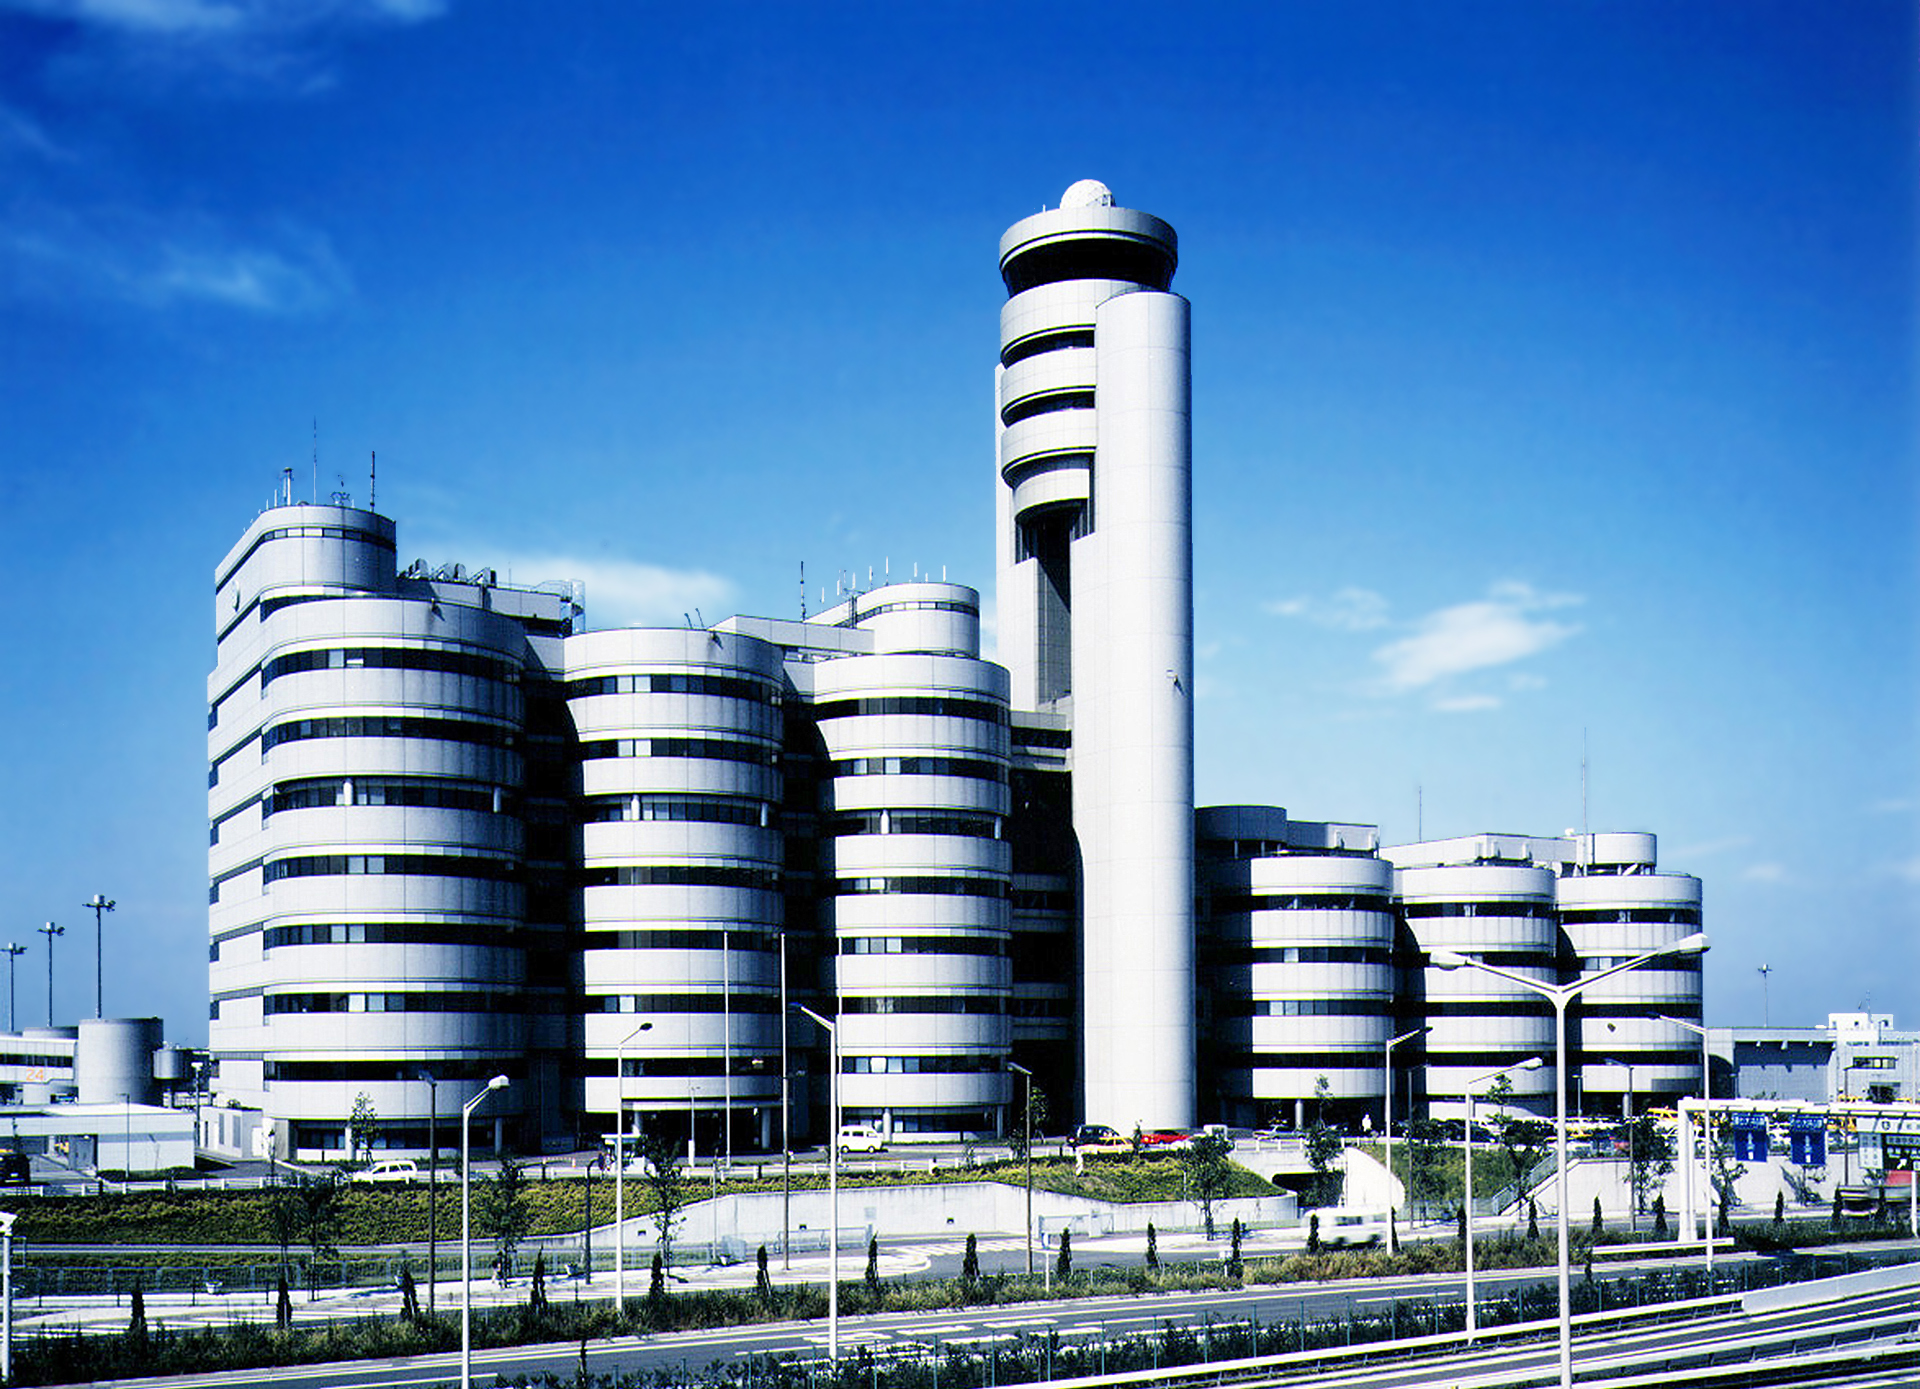 Tokyo International Airport Administration Office Building and Control Tower